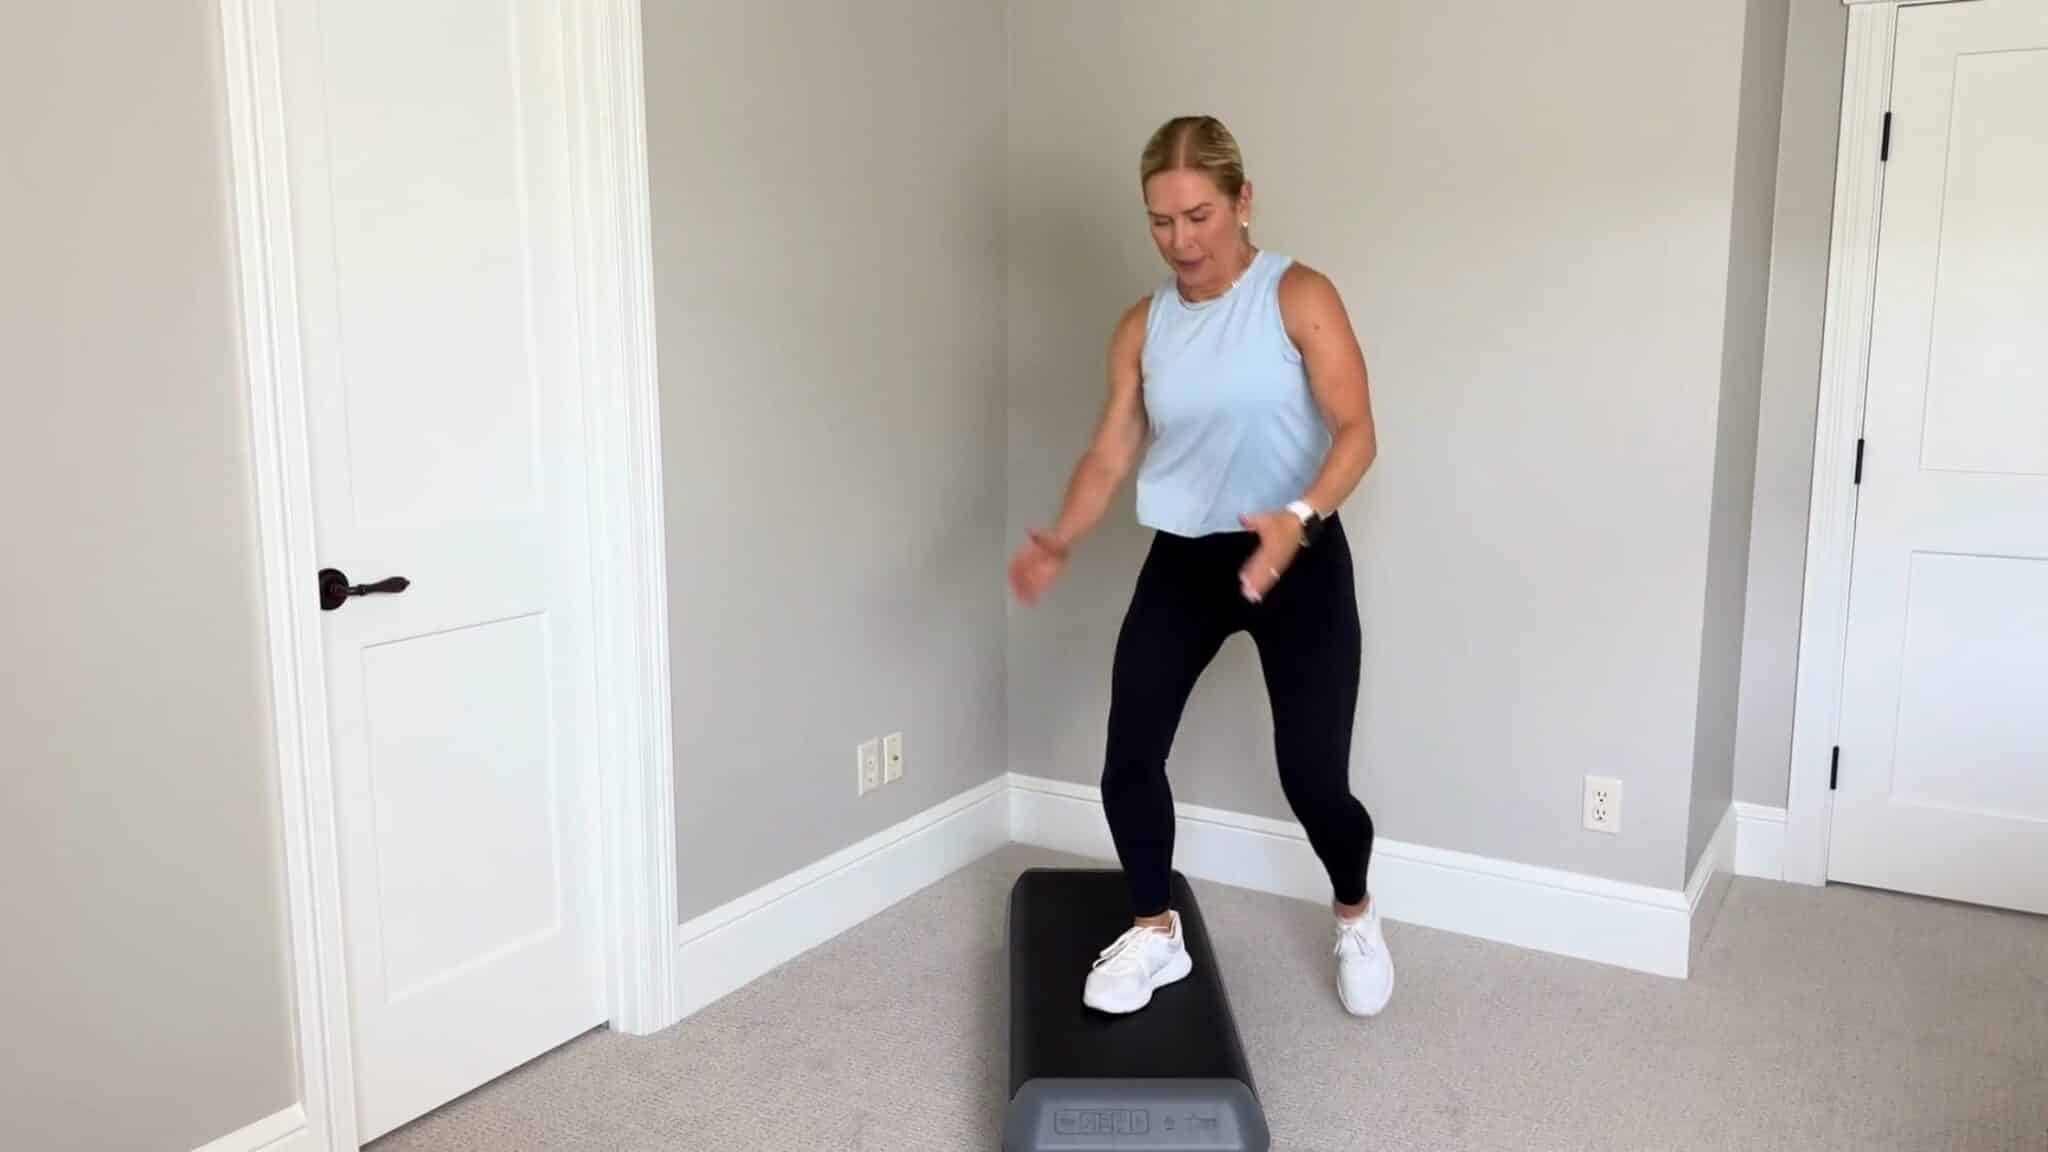 33 Best Step Exercises To Use In Your Home Workout